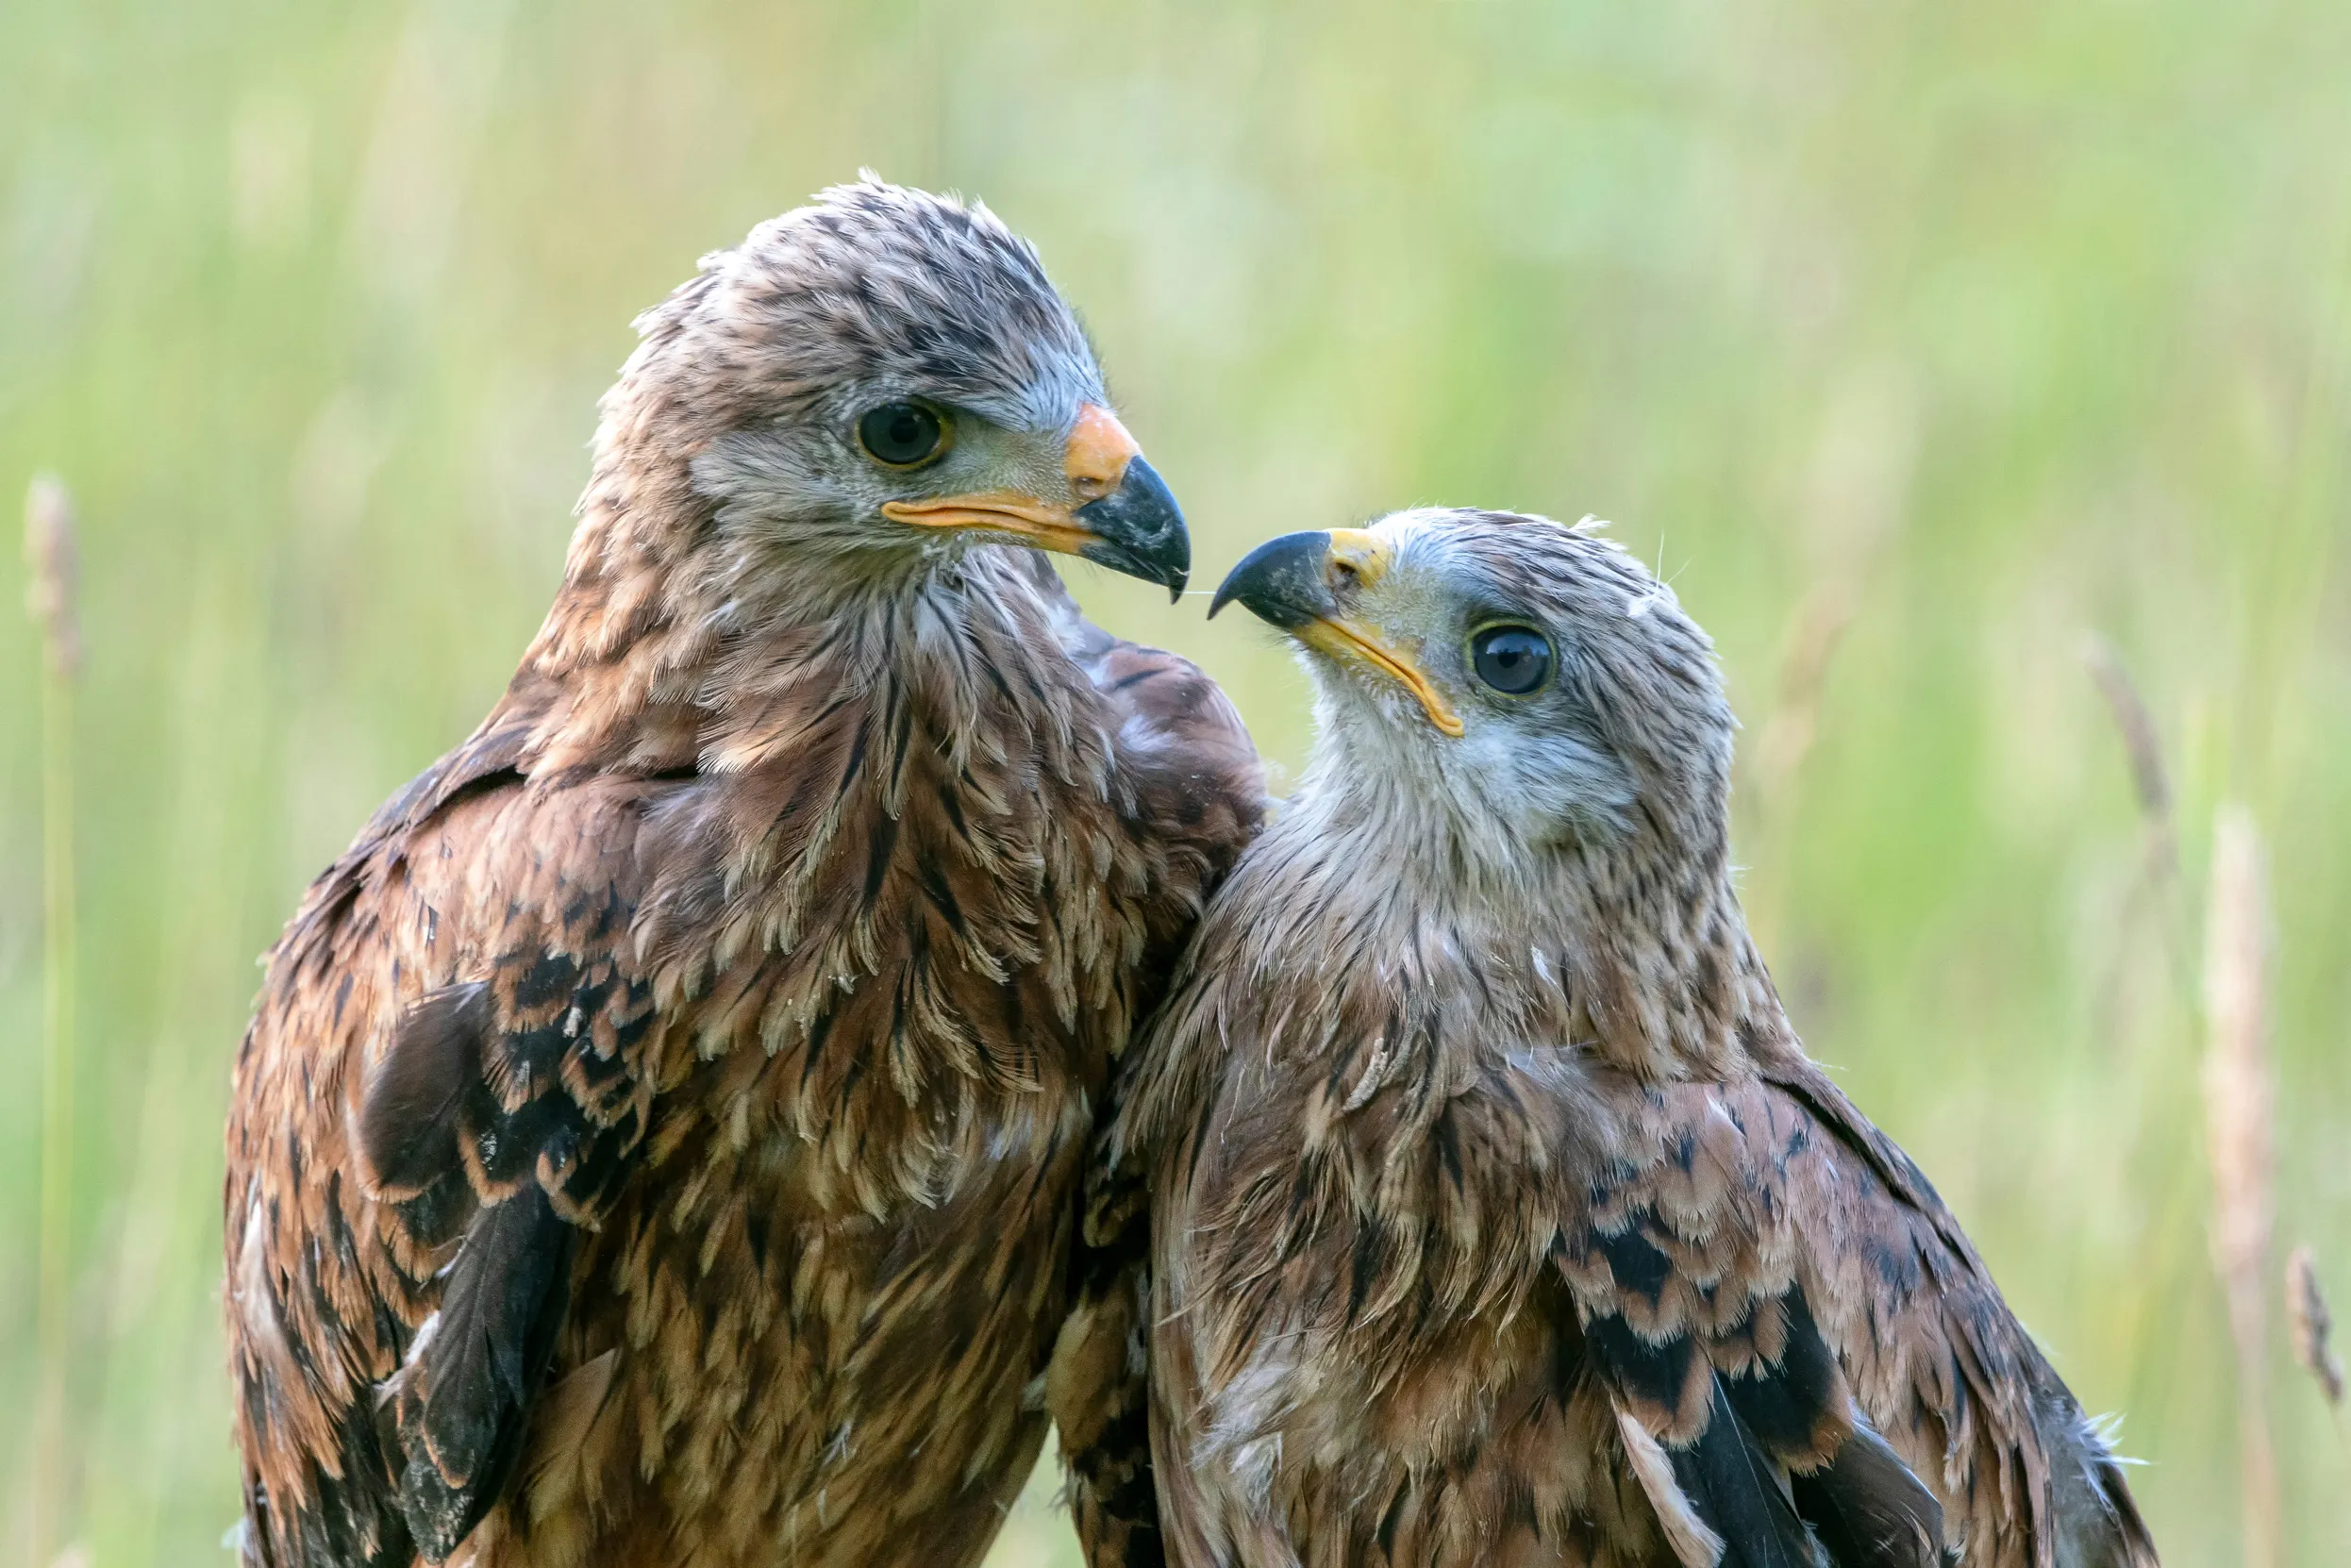 Two juvenile Red Kites touching beaks in a field of grass.